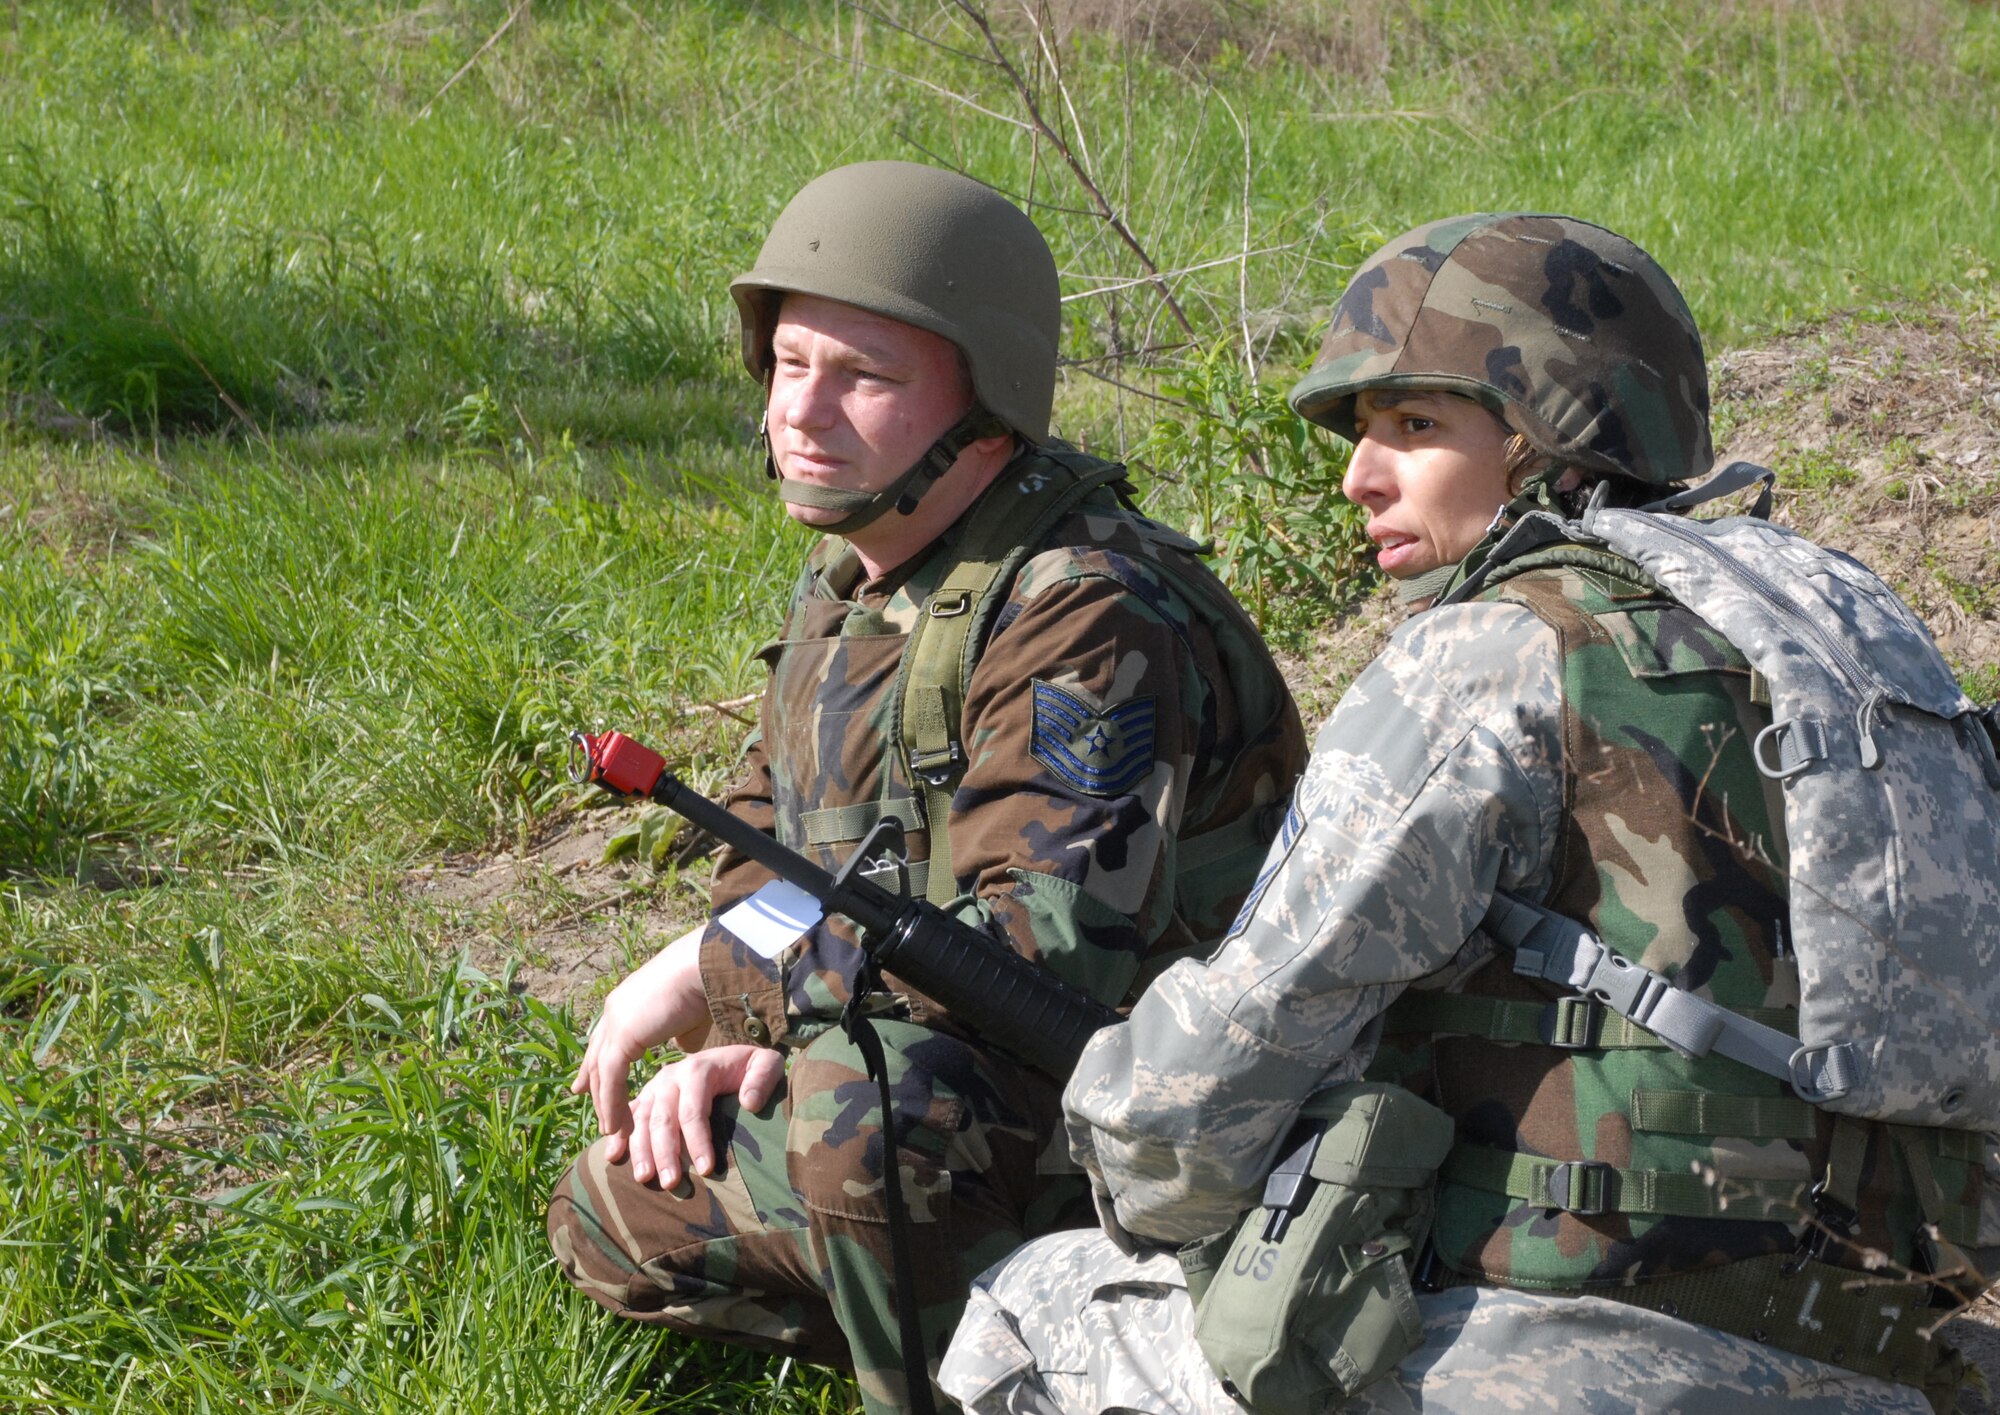 Members of the 932nd Airlift Wing, including the new Command Chief Master Sgt. Sandra Santos (right),  went through Air Base Ground Defense classes in preparation for an overseas deployment. The training is designed to prepare Airmen to defend a base against intruders, as well as methods for approaching suspicious individuals.  Photo/Maj. Stan Paregien